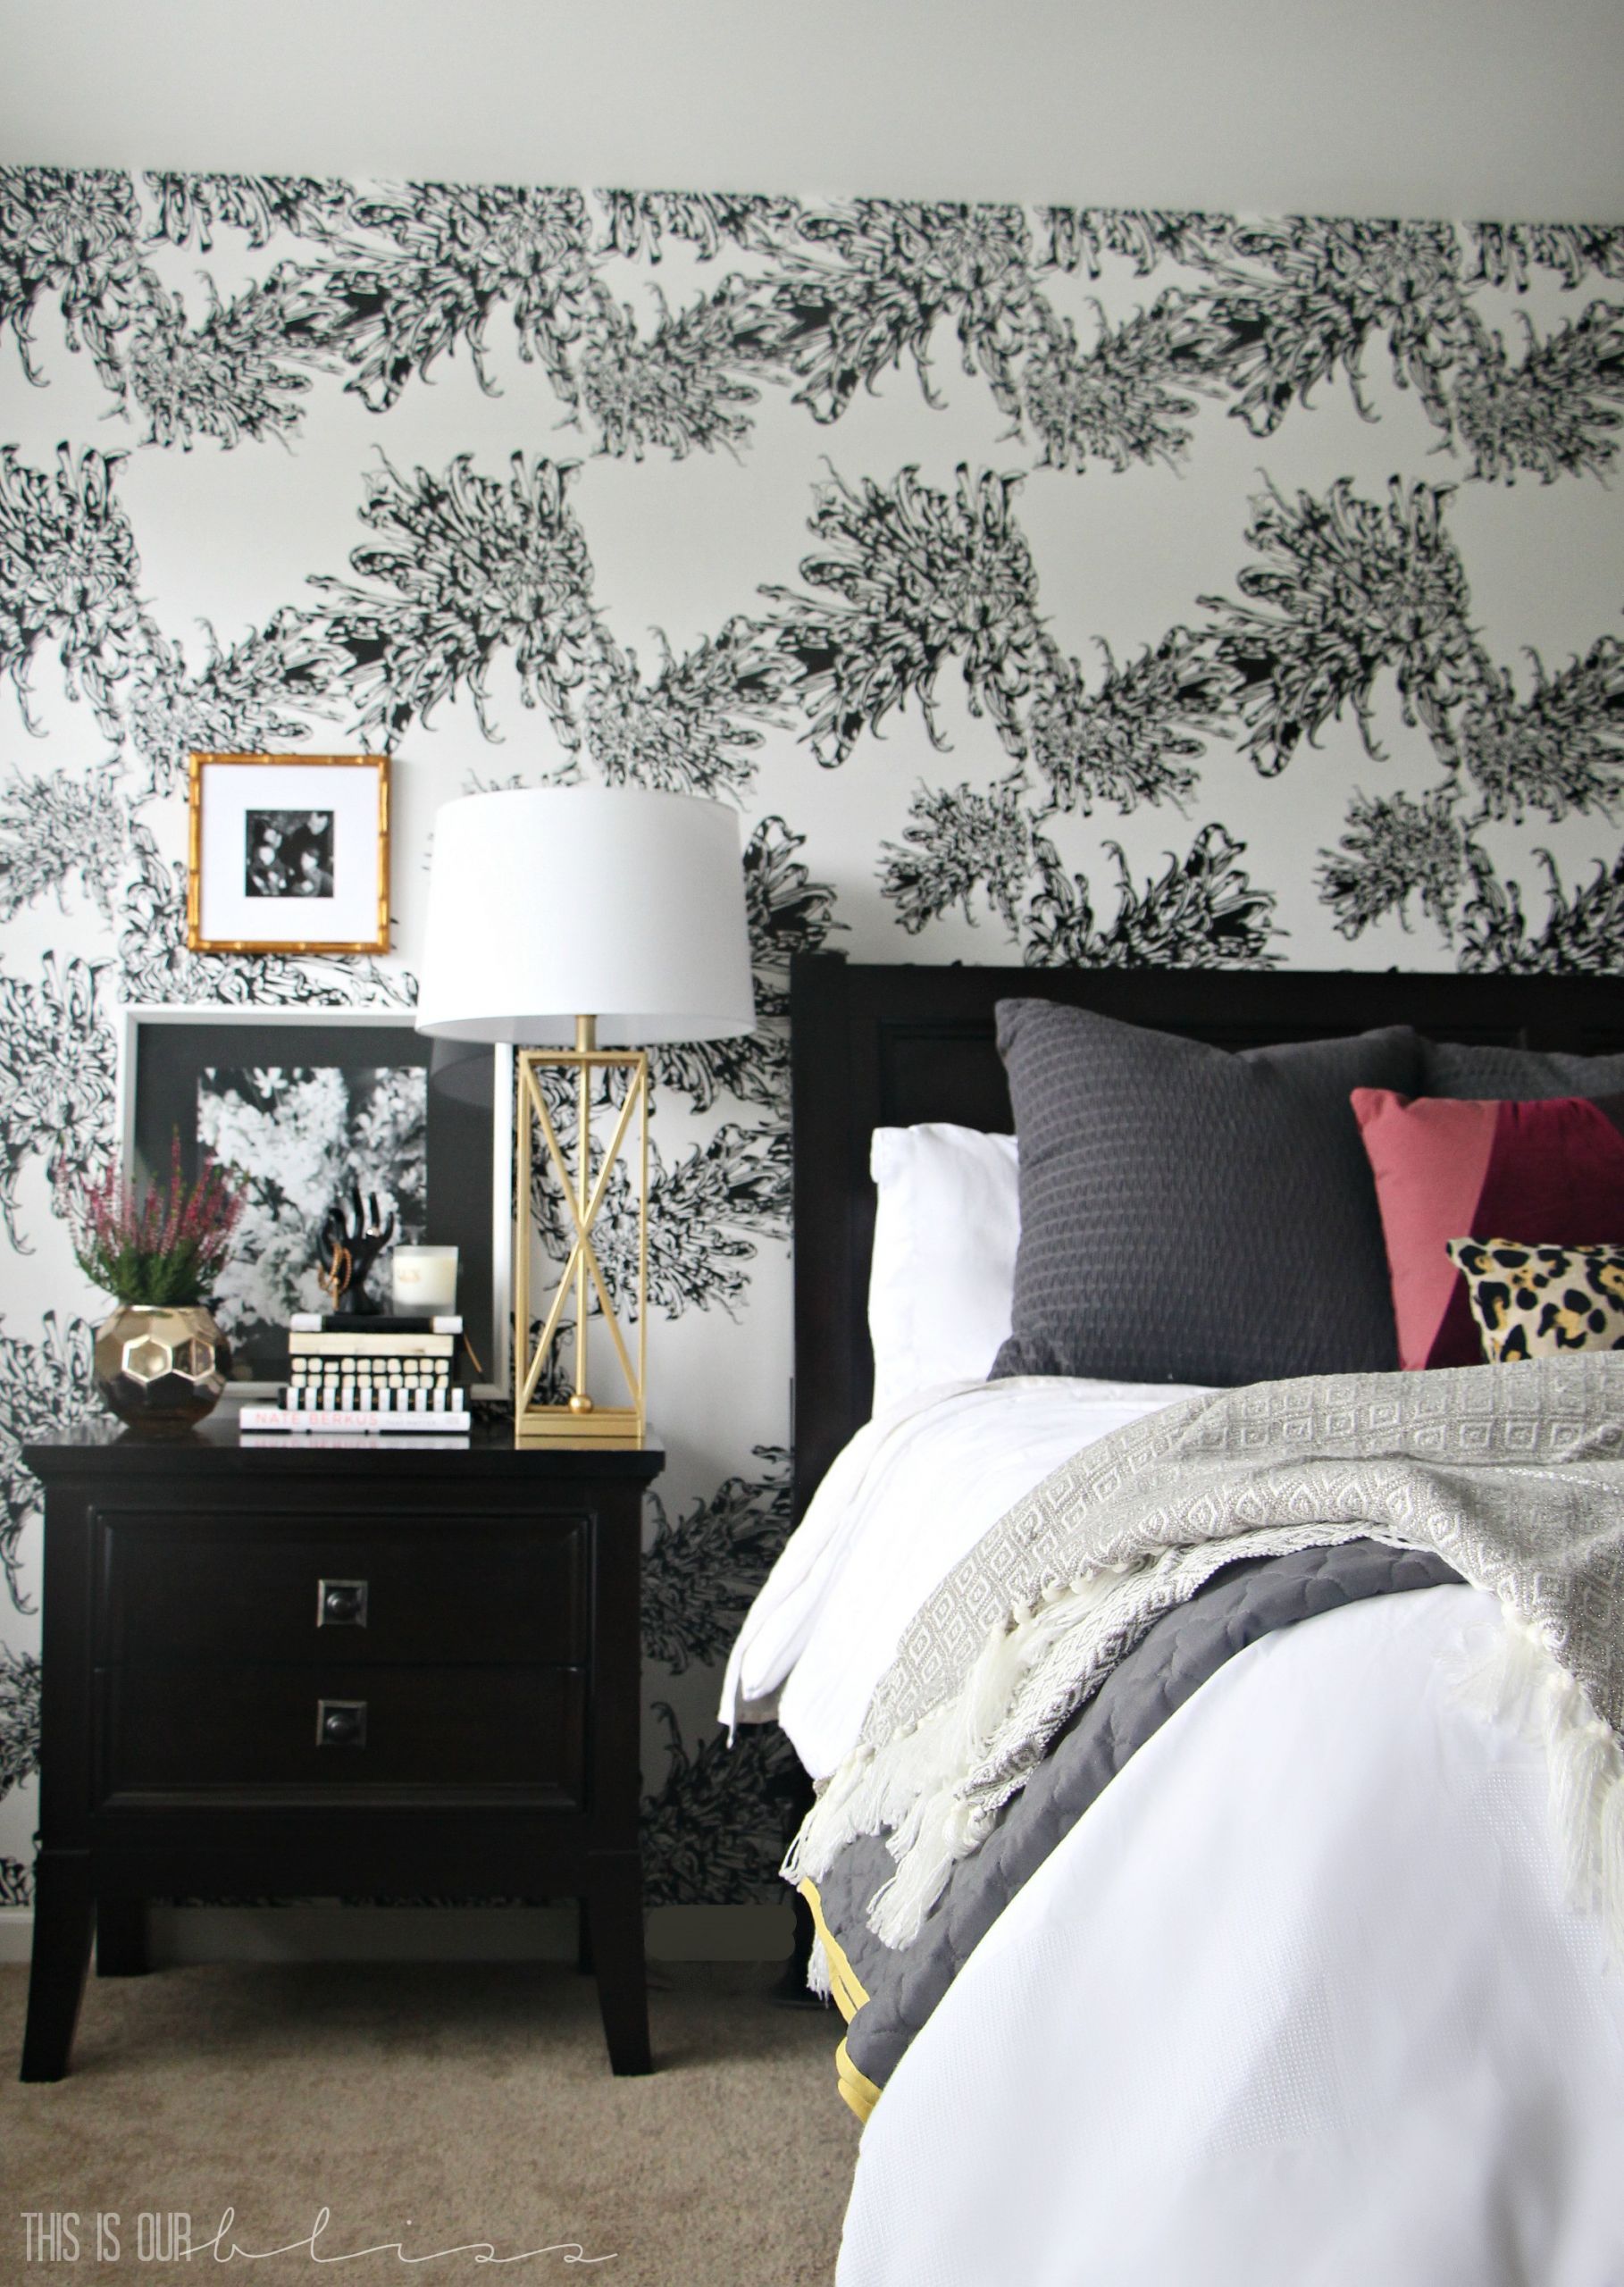 Accent Wallpaper Bedroom
 Master Bedroom Accent Wall with Wallpaper This is our Bliss